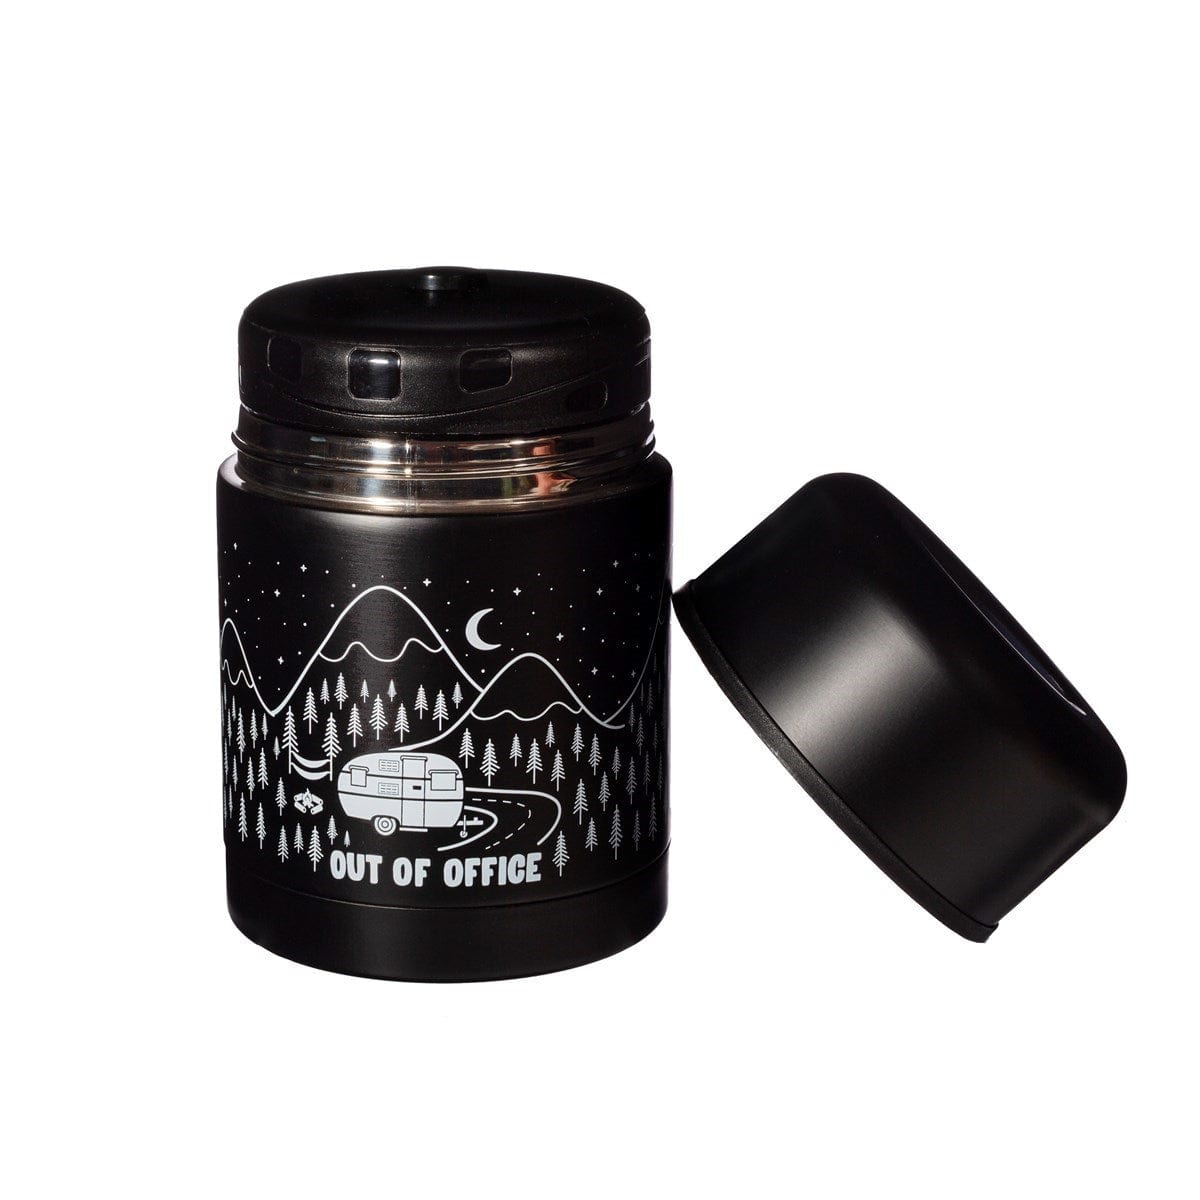 Sass & Belle 'Out Of Office' Black Food Flask